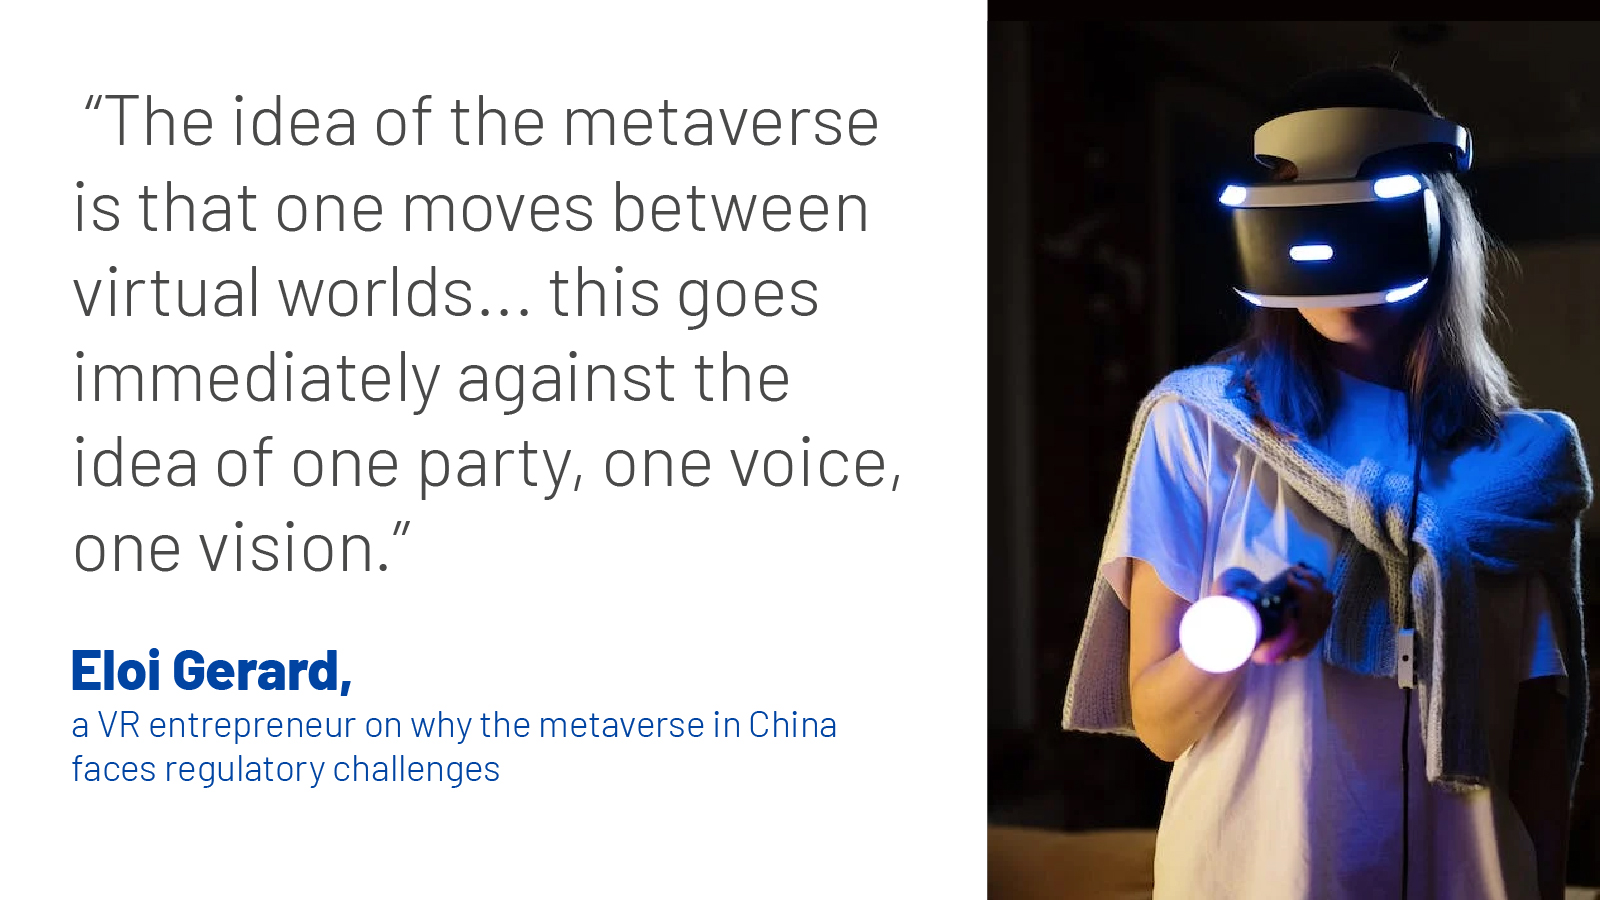 The metaverse is viewed as a national security risk in China